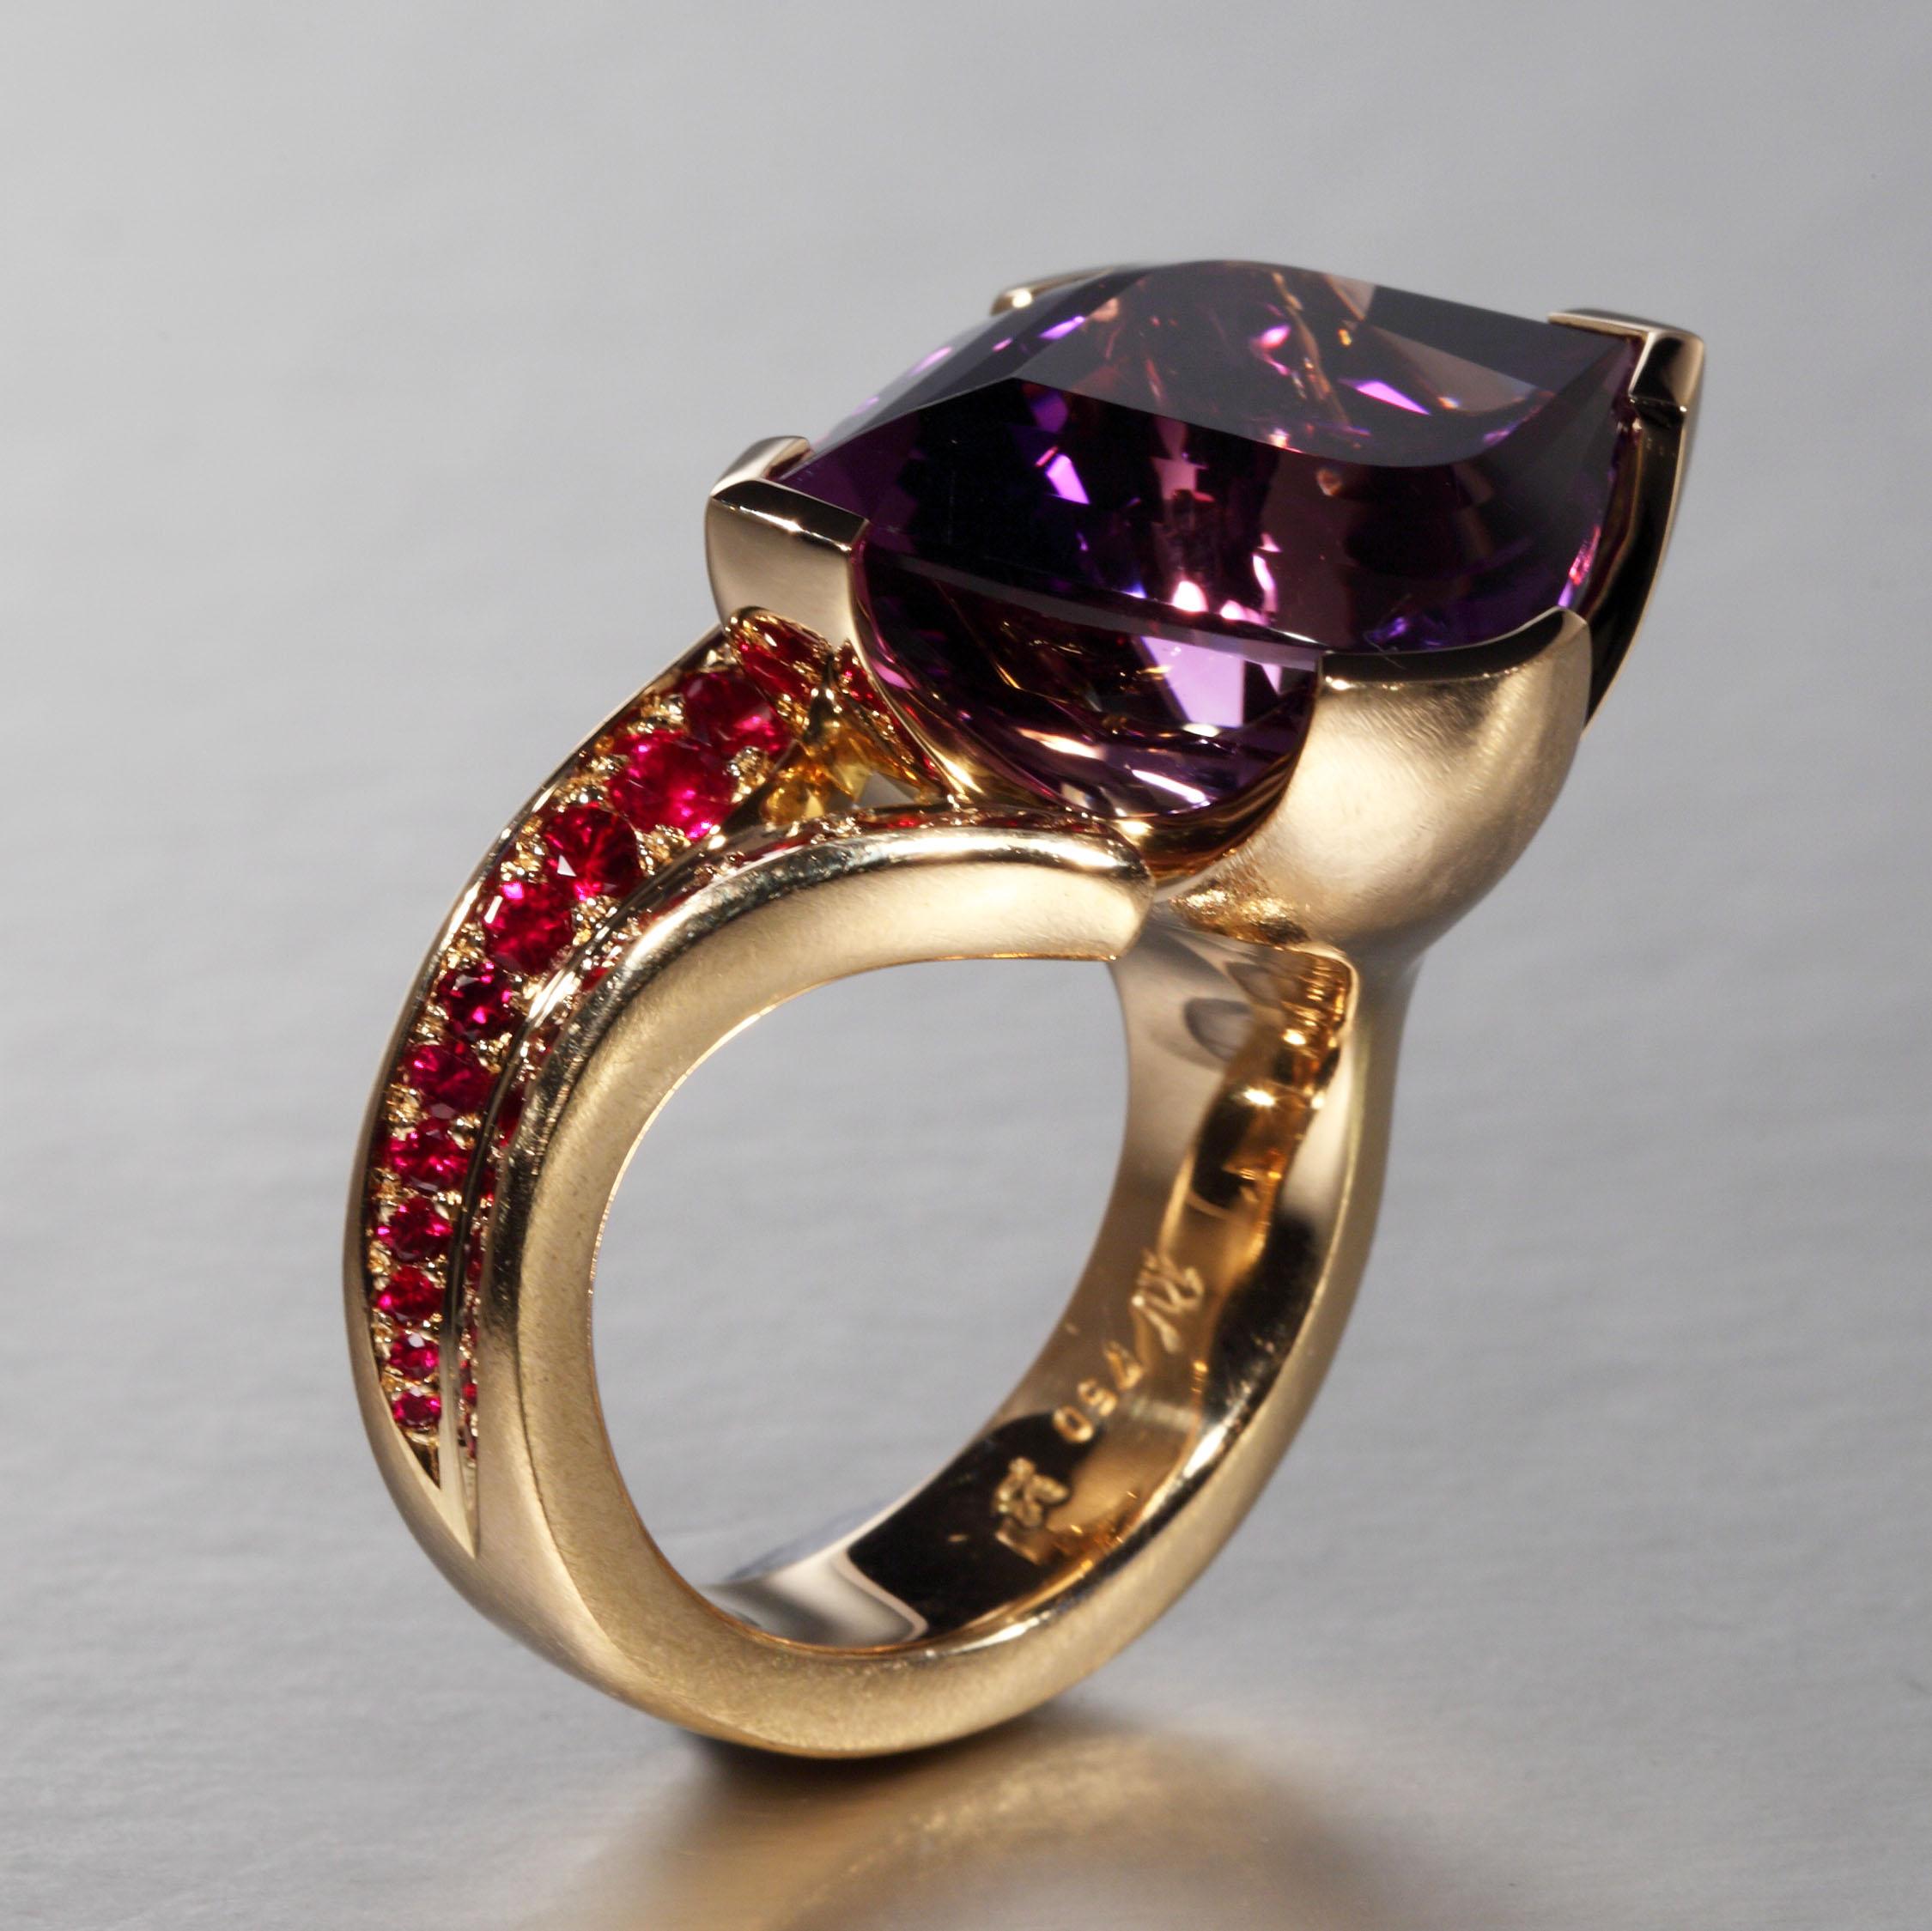 Contemporary Robert Vogelsang 20.24 Carat Amethyst Ruby Rose Gold Cocktail Ring For Sale